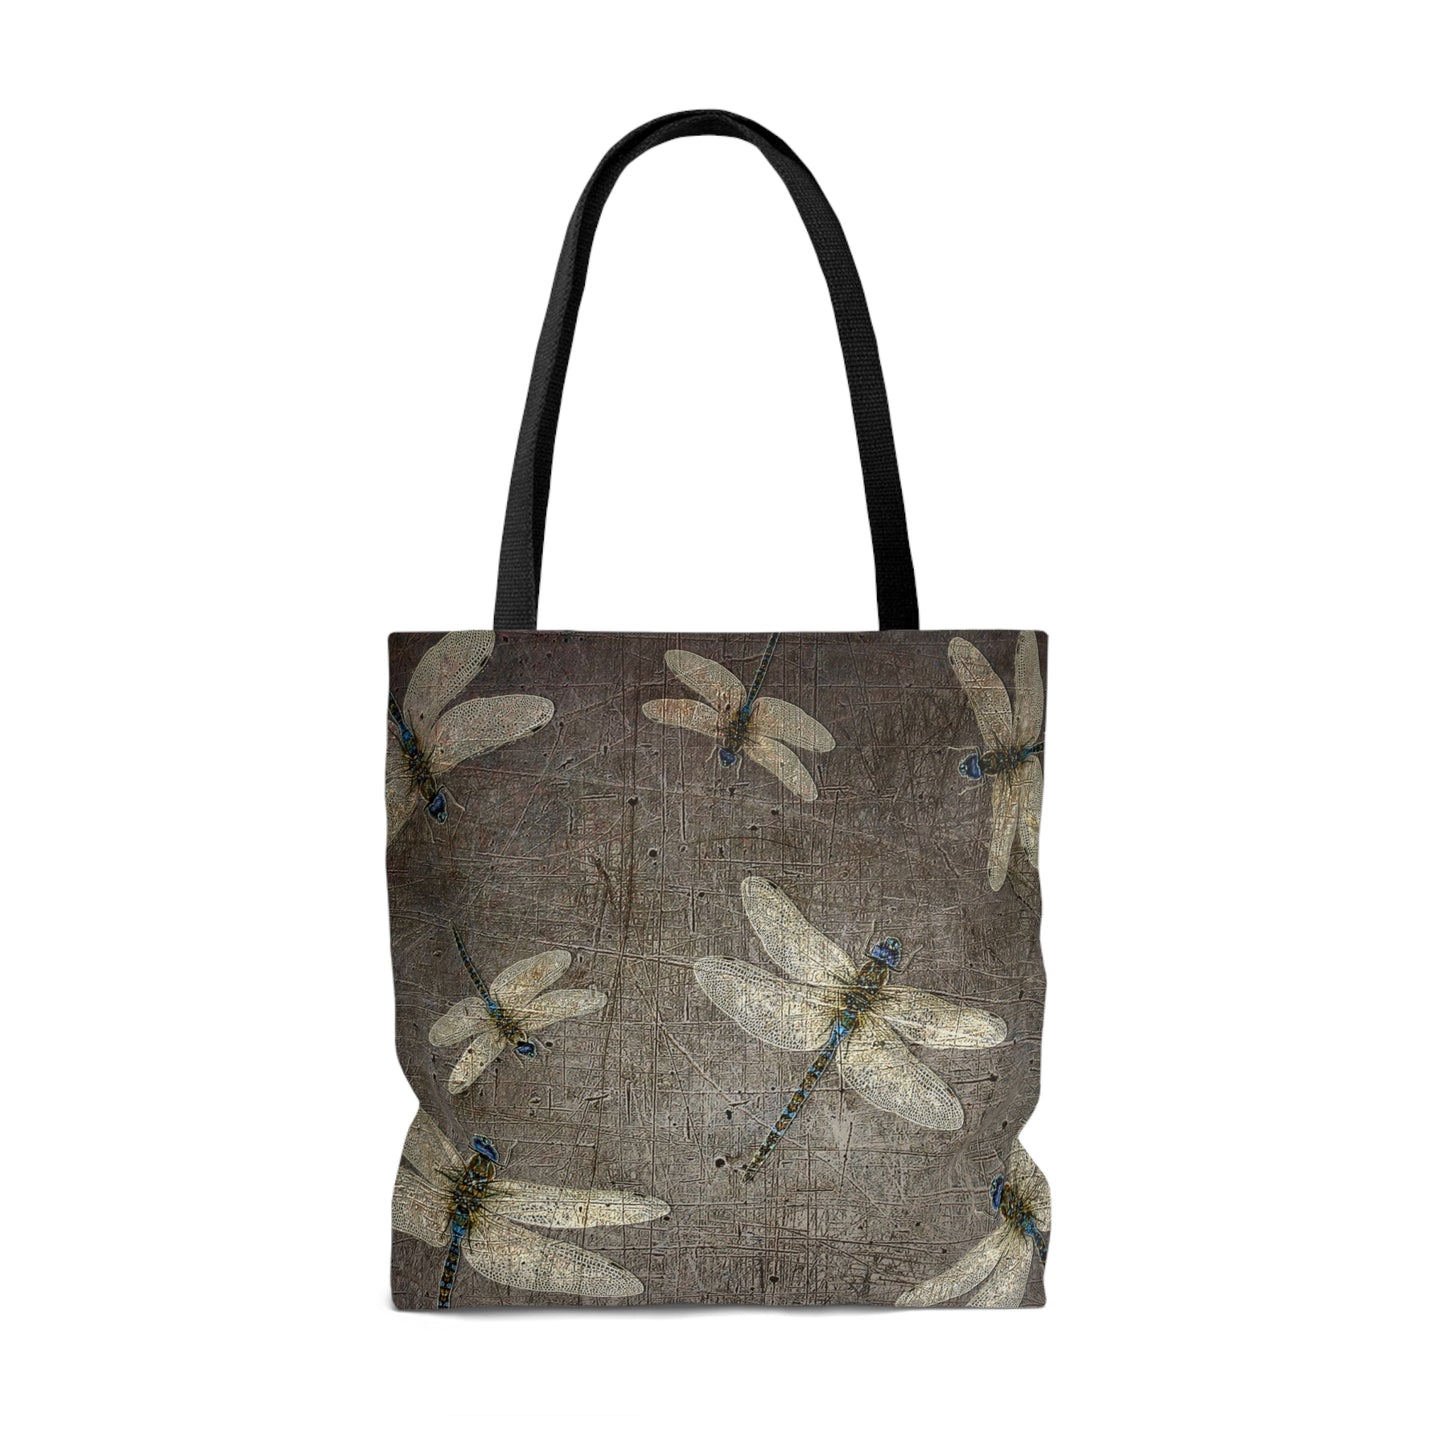 Flight of Dragonflies on Distressed Gray Stone Printed on Tote Bag medium back